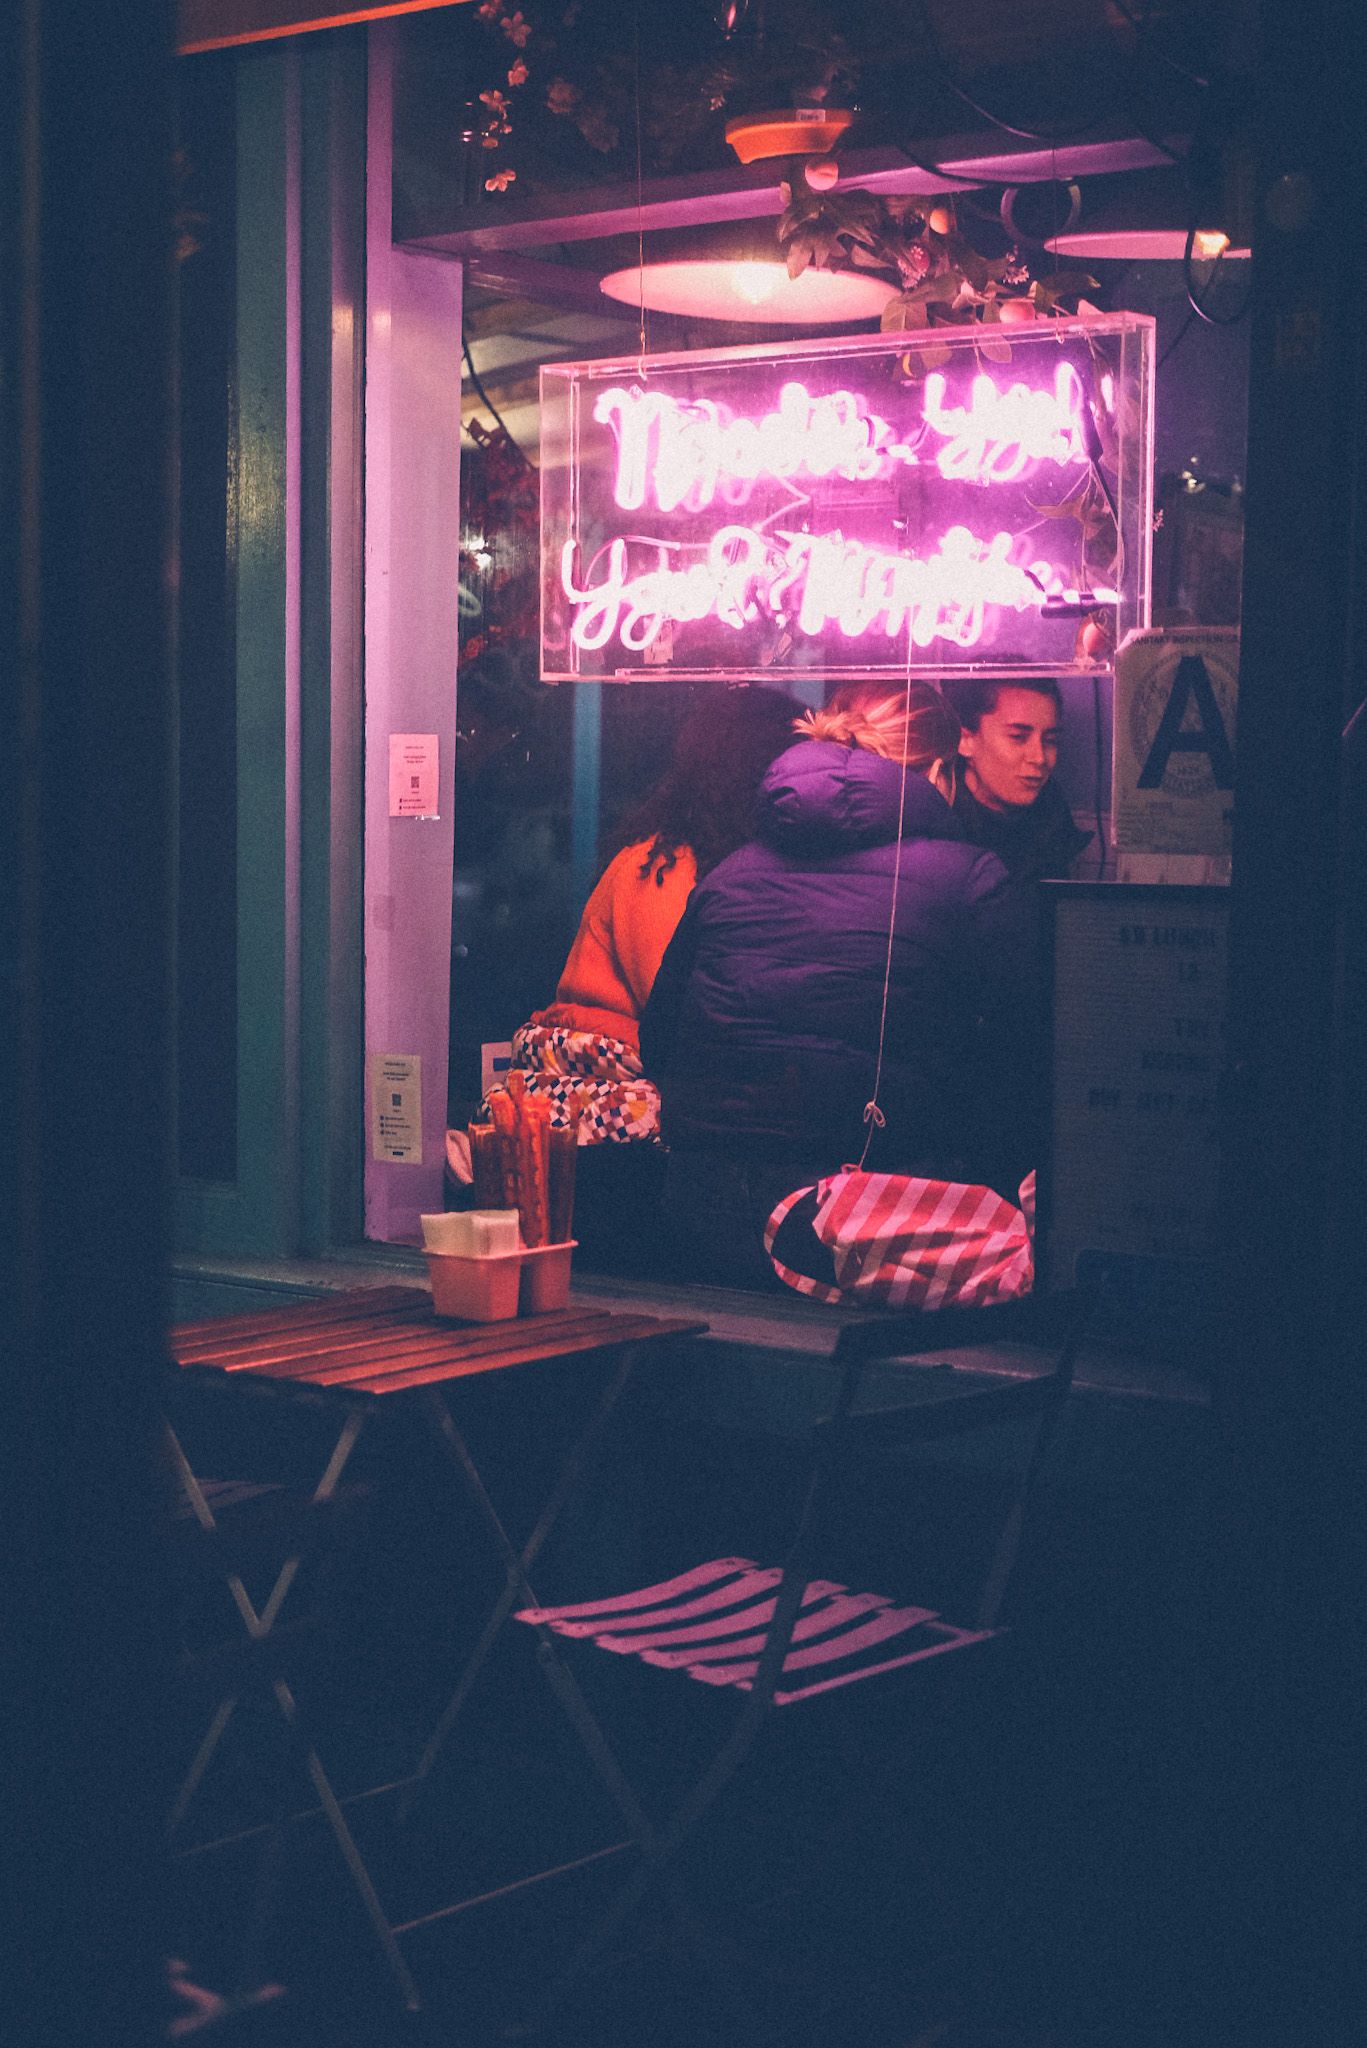 In the night, a pink neon sign (letters unreadable because they’re overexposed) illuminates an outdoor sitting area of a restaurant with a slatted wood table and folding chair. Behind the window, inside, a group of women eat.